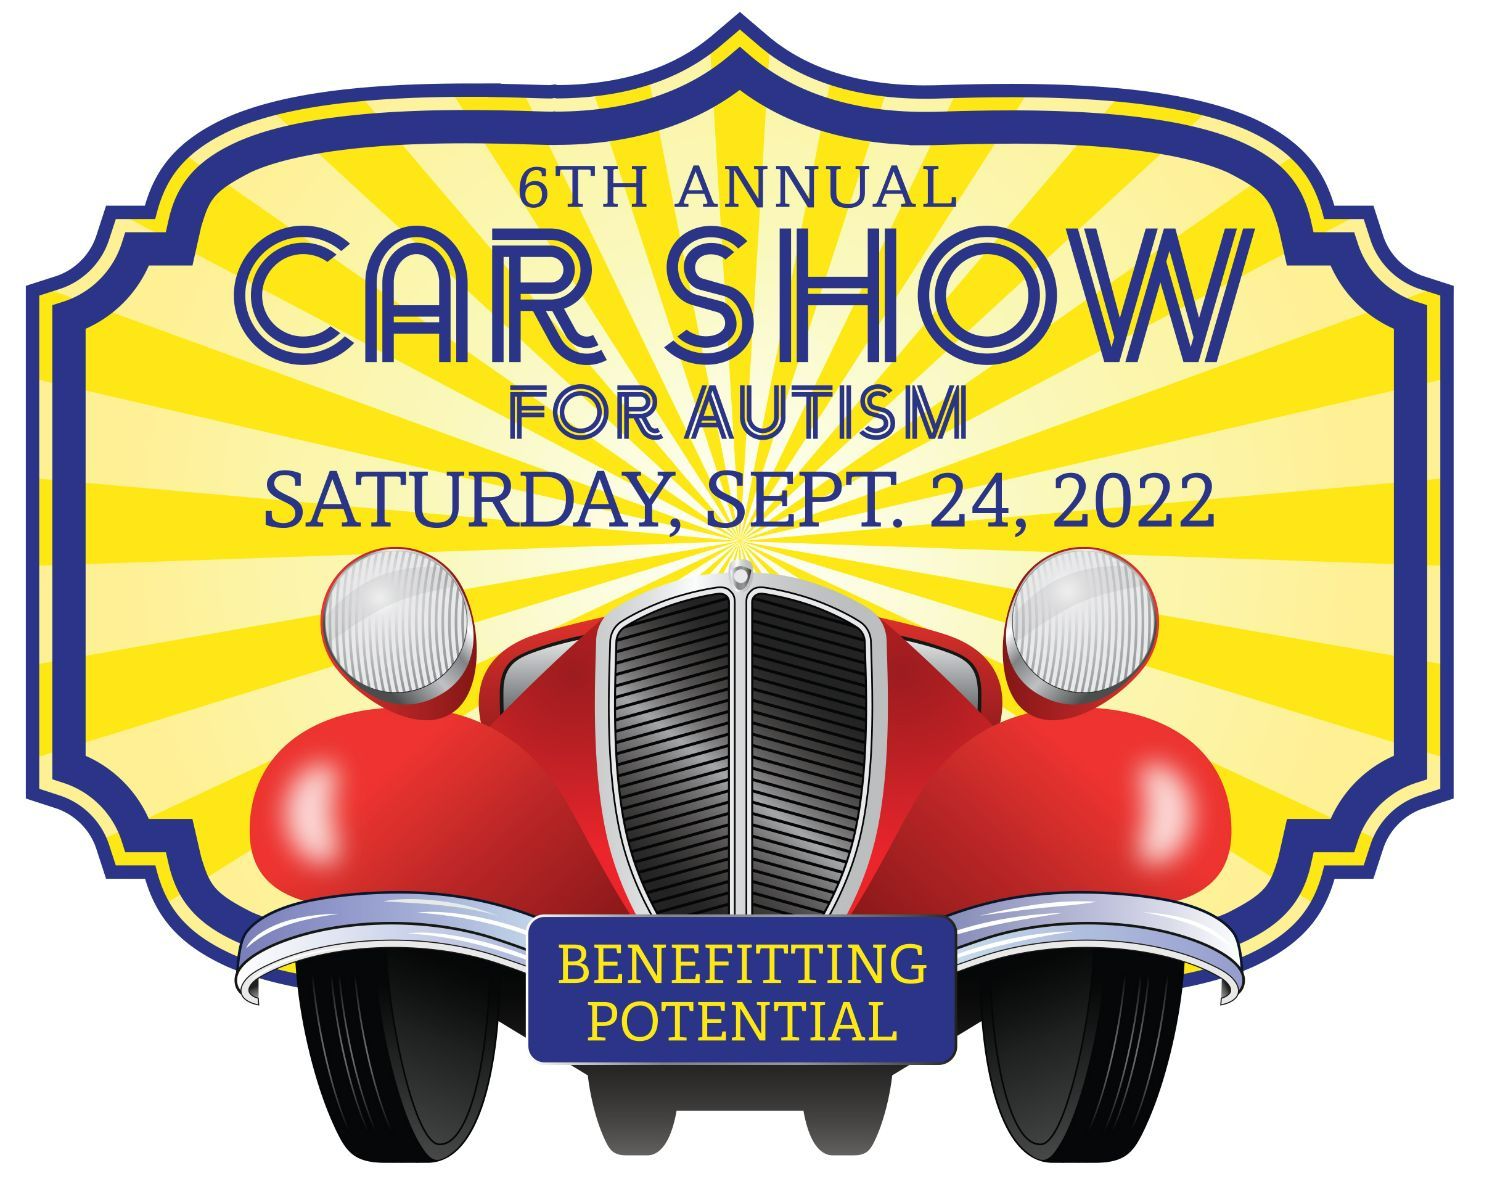 Save the date for our 6th Annual Car Show for Autism. Click the image to learn more